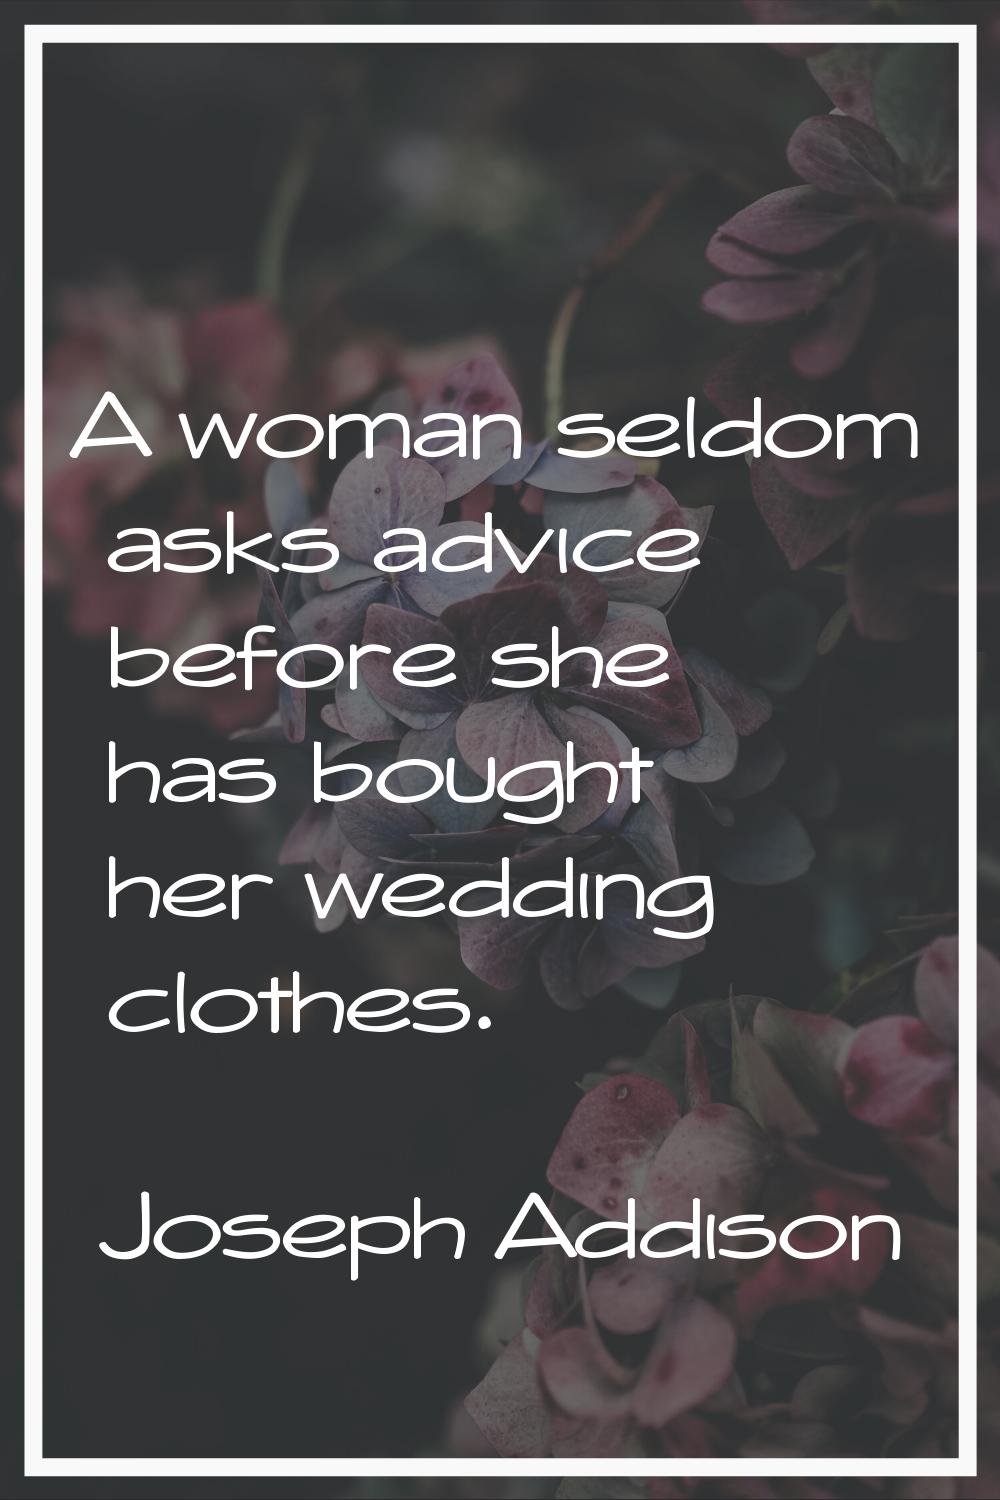 A woman seldom asks advice before she has bought her wedding clothes.